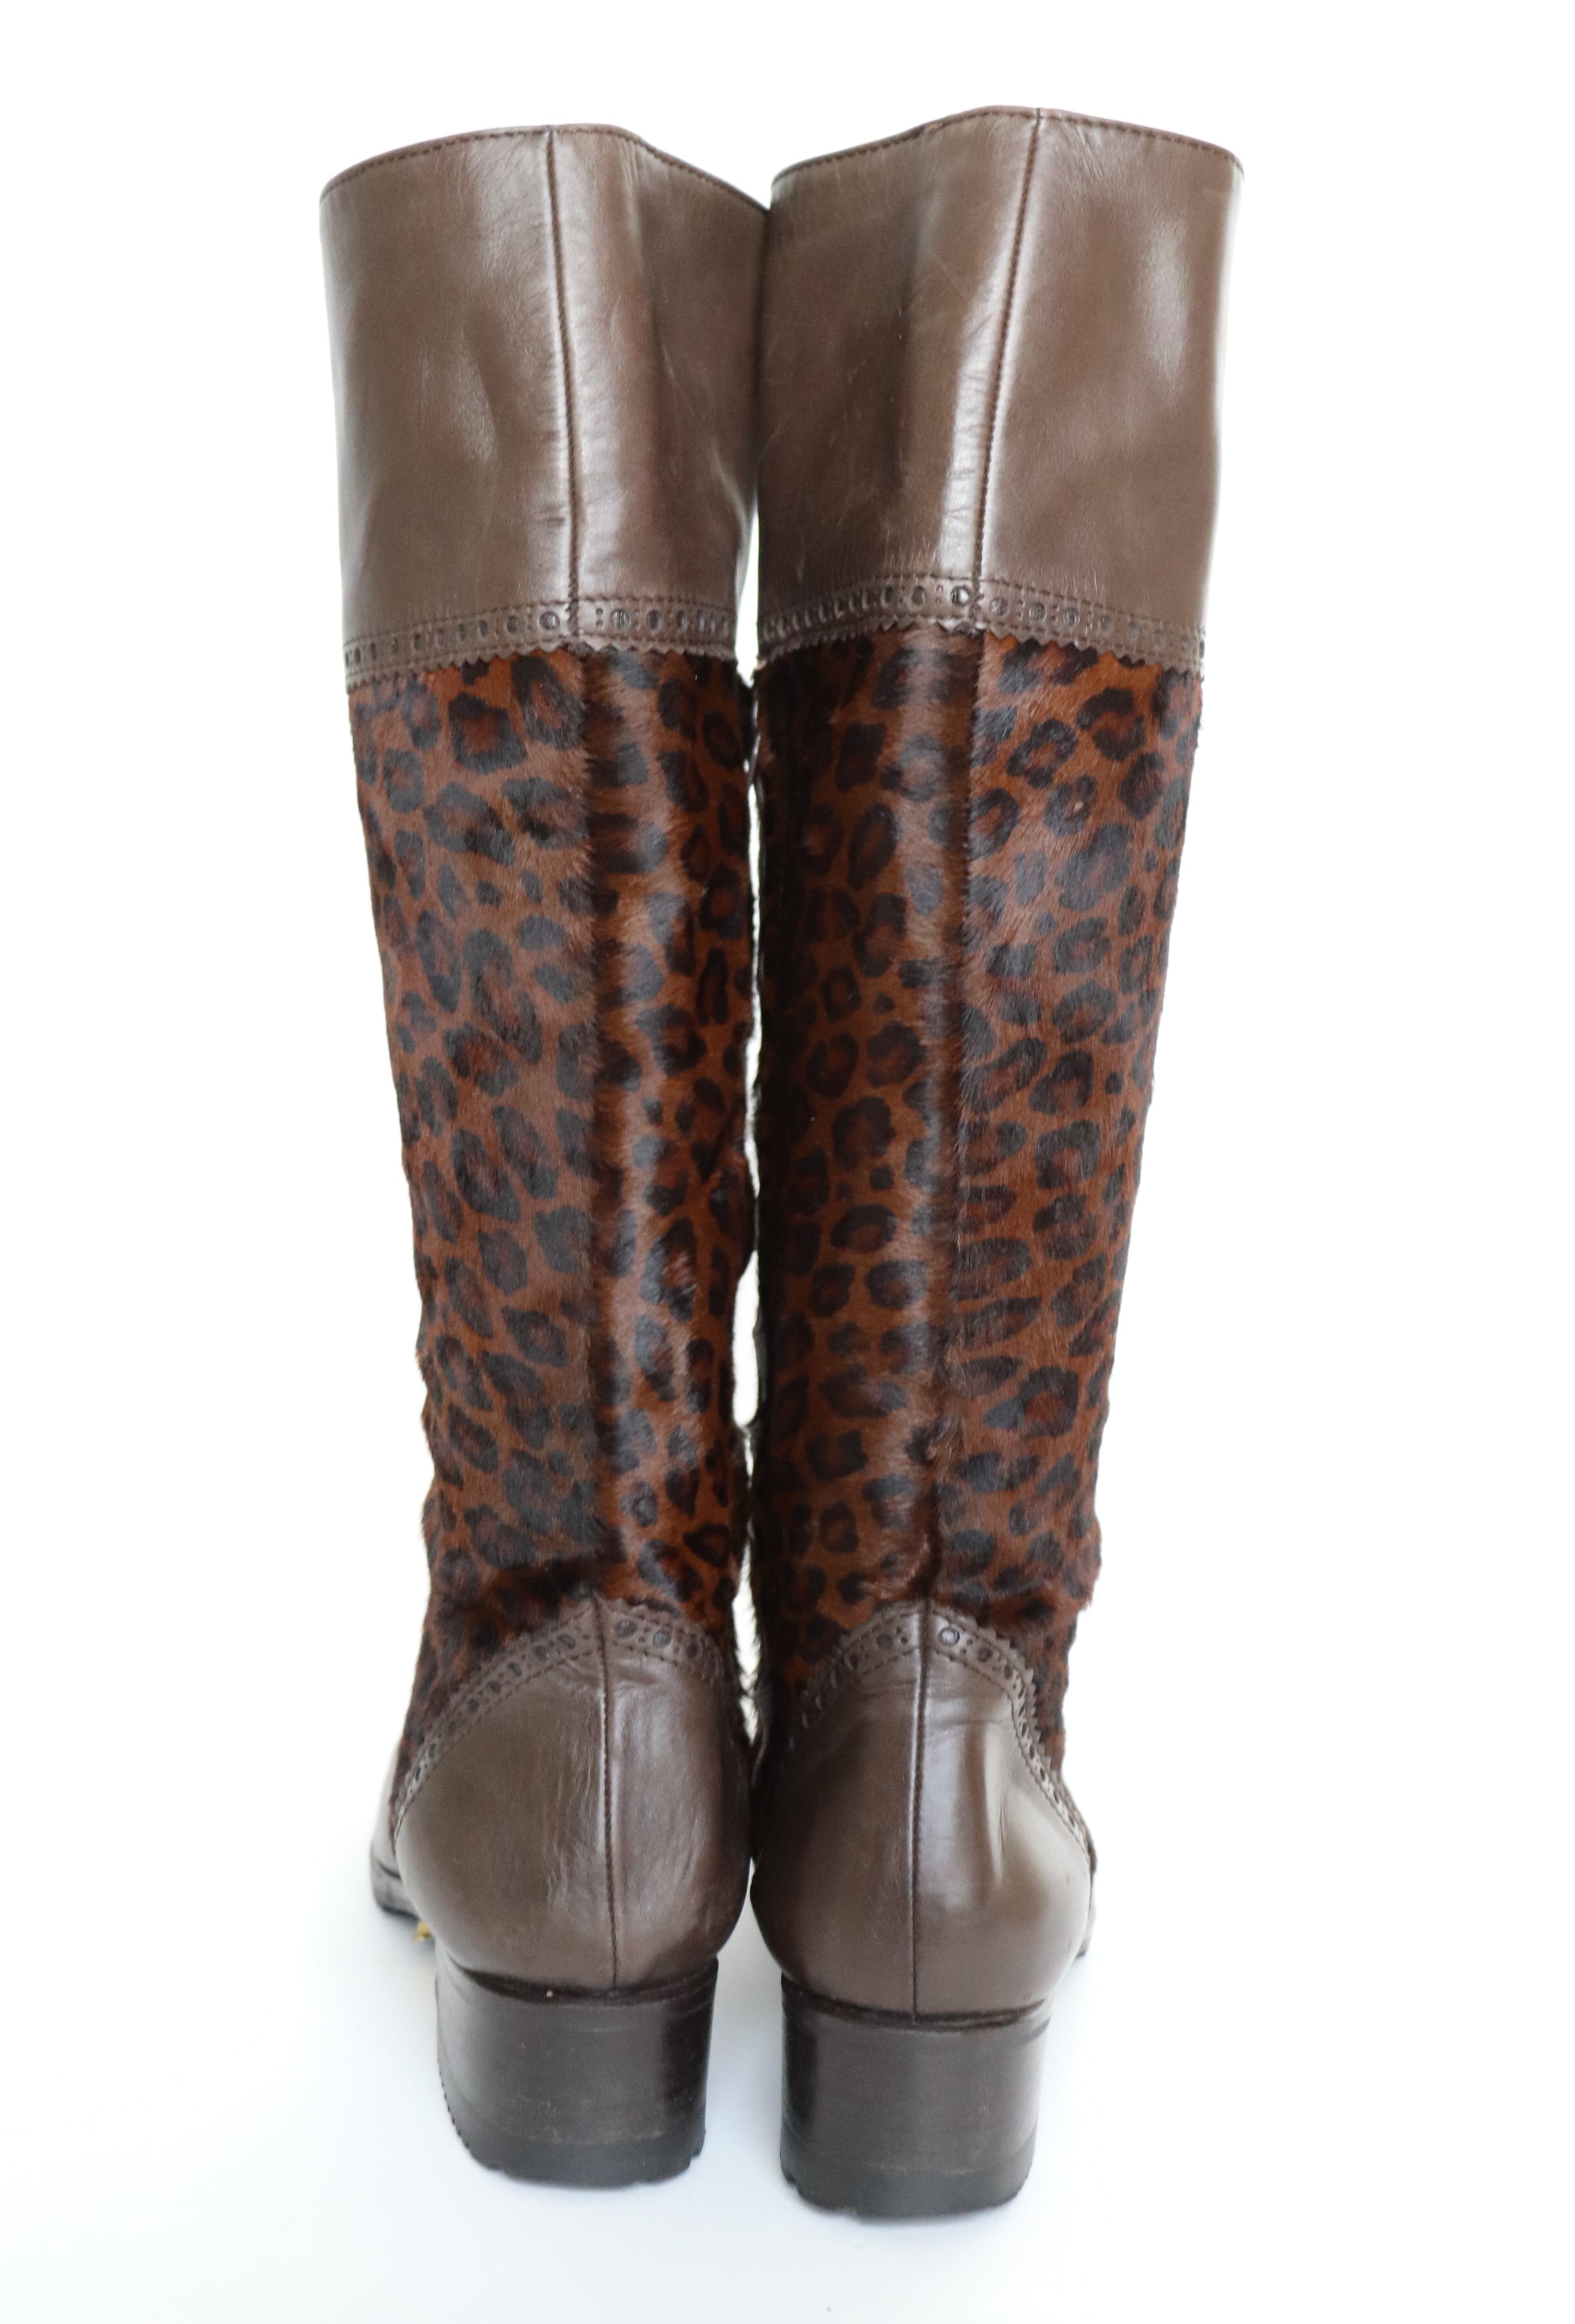 Verbano Long Boots -  Leopard Print Pony Skin / Brown Leather  37 / UK 4